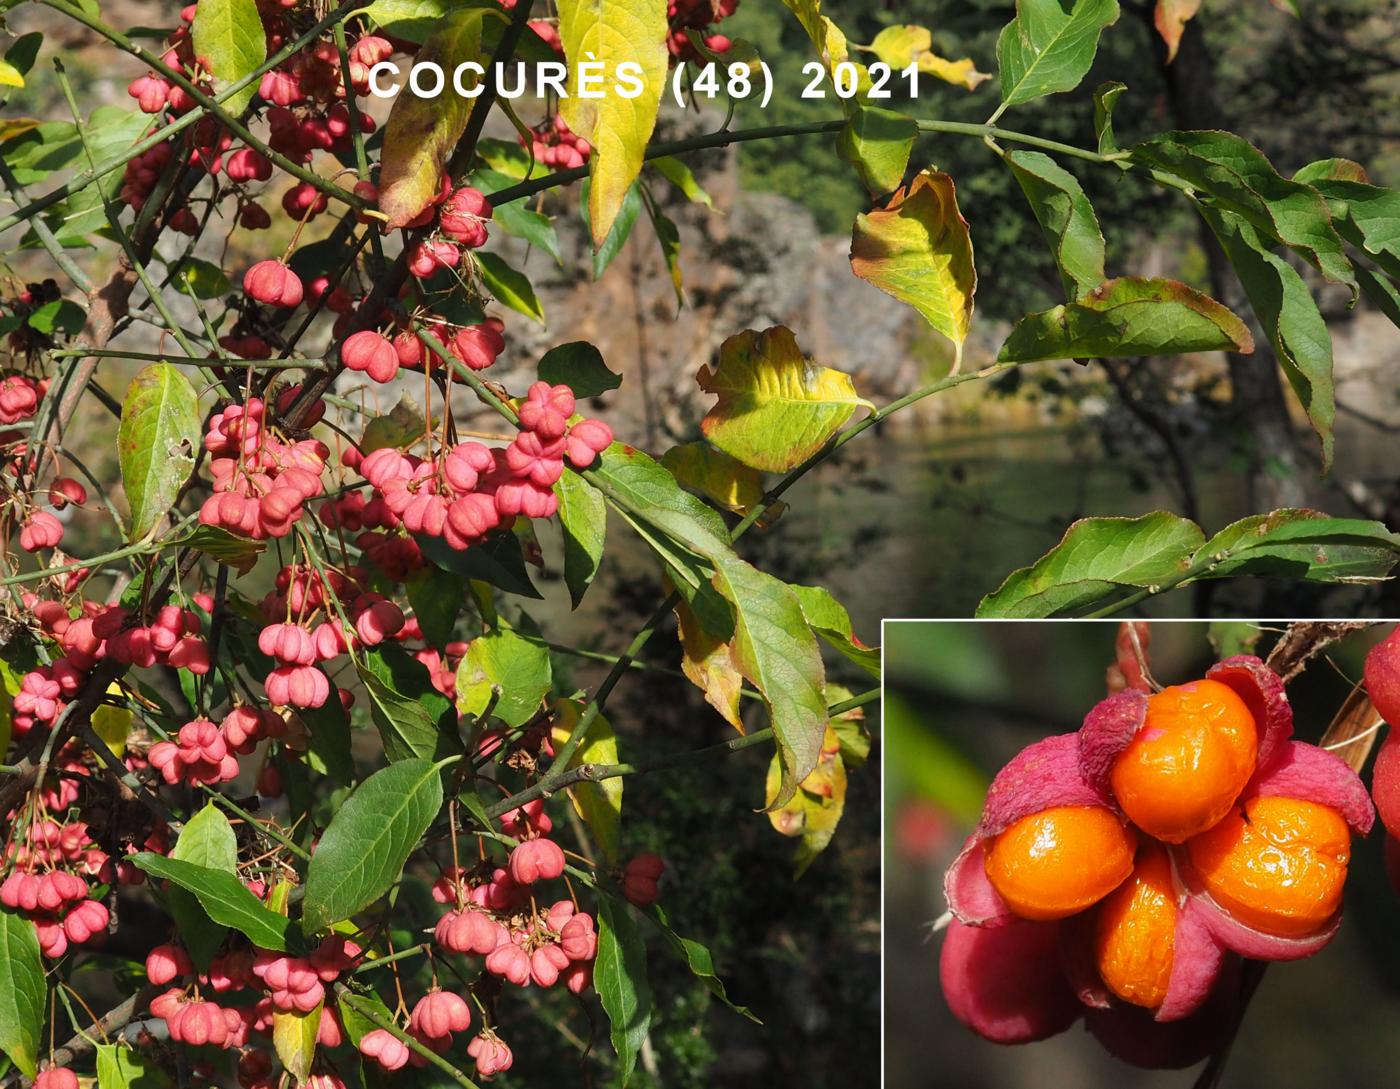 Spindle-tree fruit